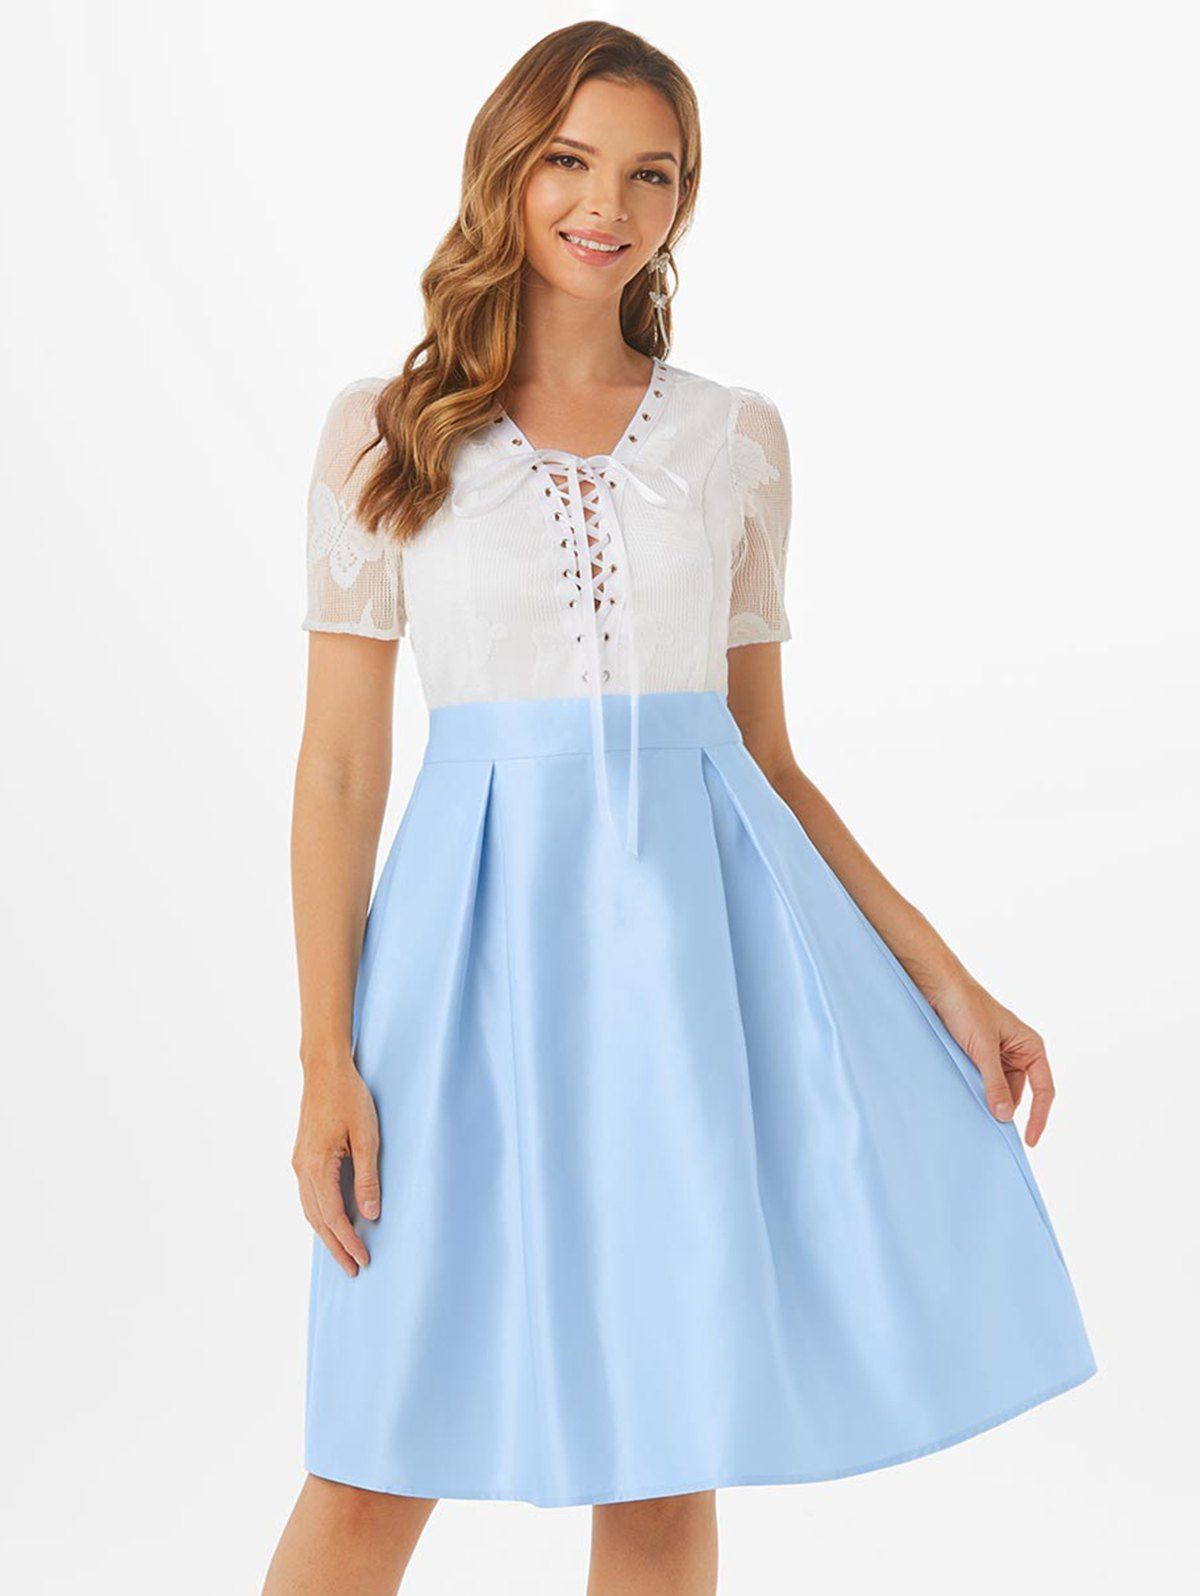 Lace Up Silky Lace Overlay Party Dress - LIGHT BLUE 2XL